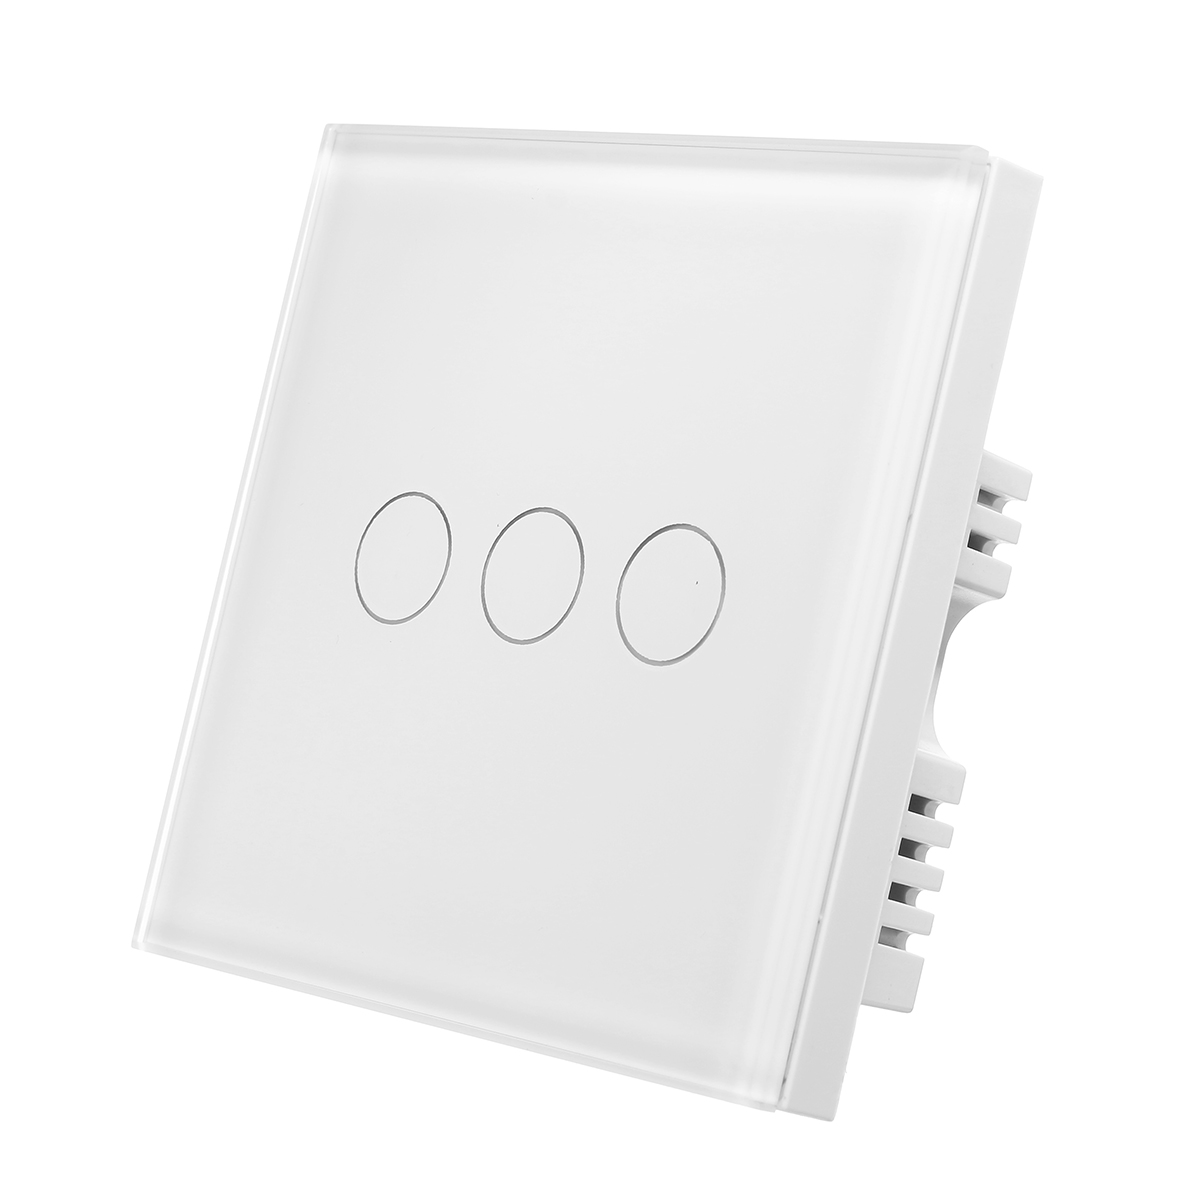 3-Gang-1-Way-WIFI-Smart-Light-Touch-Remote-Control-Wall-Switch-For-Amazon-Alexa-1206040-3